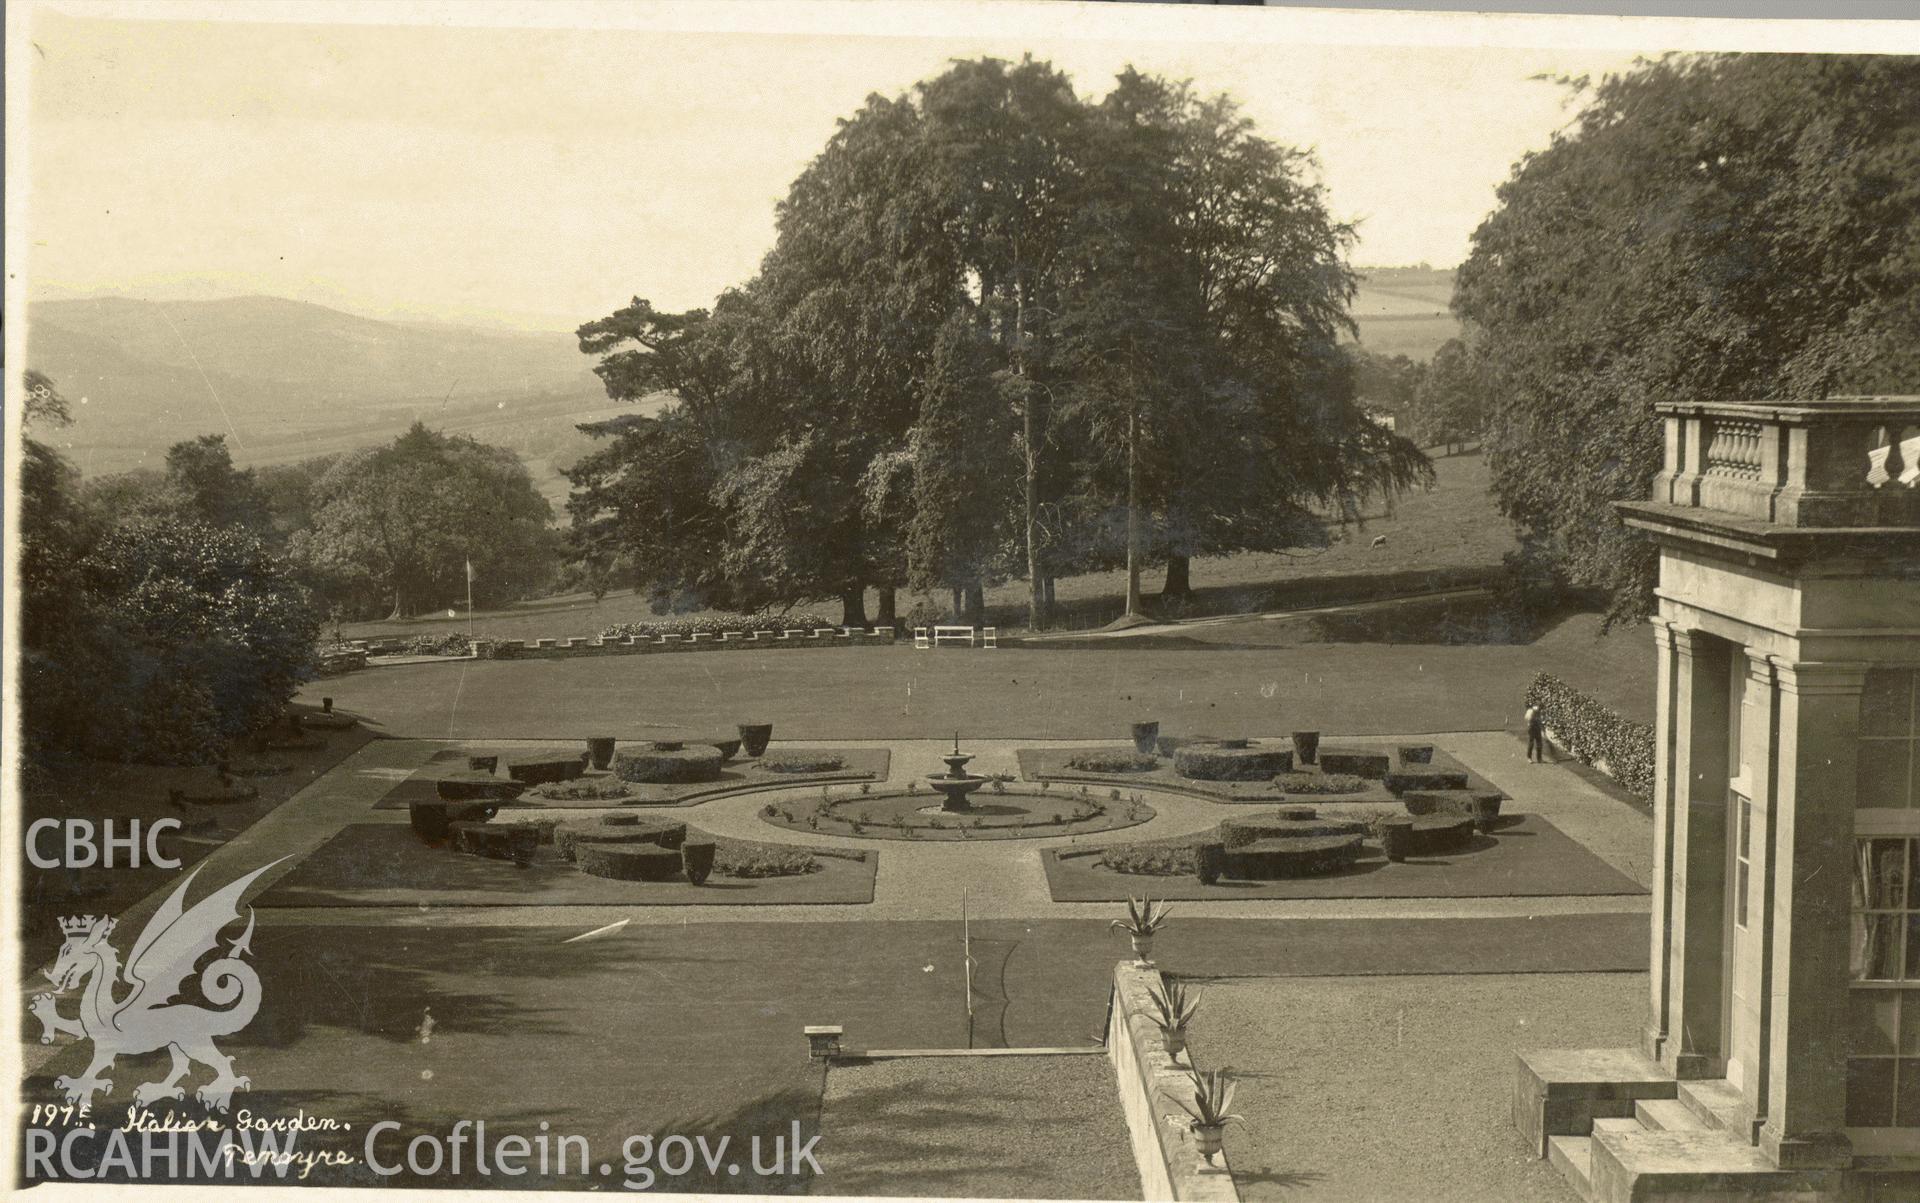 Digitised postcard image of Italian garden, Penoyre, Talgarth, O. Jackson, Wellington Studio, Talgarth. Produced by Parks and Gardens Data Services, from an original item in the Peter Davis Collection at Parks and Gardens UK. We hold only web-resolution images of this collection, suitable for viewing on screen and for research purposes only. We do not hold the original images, or publication quality scans.